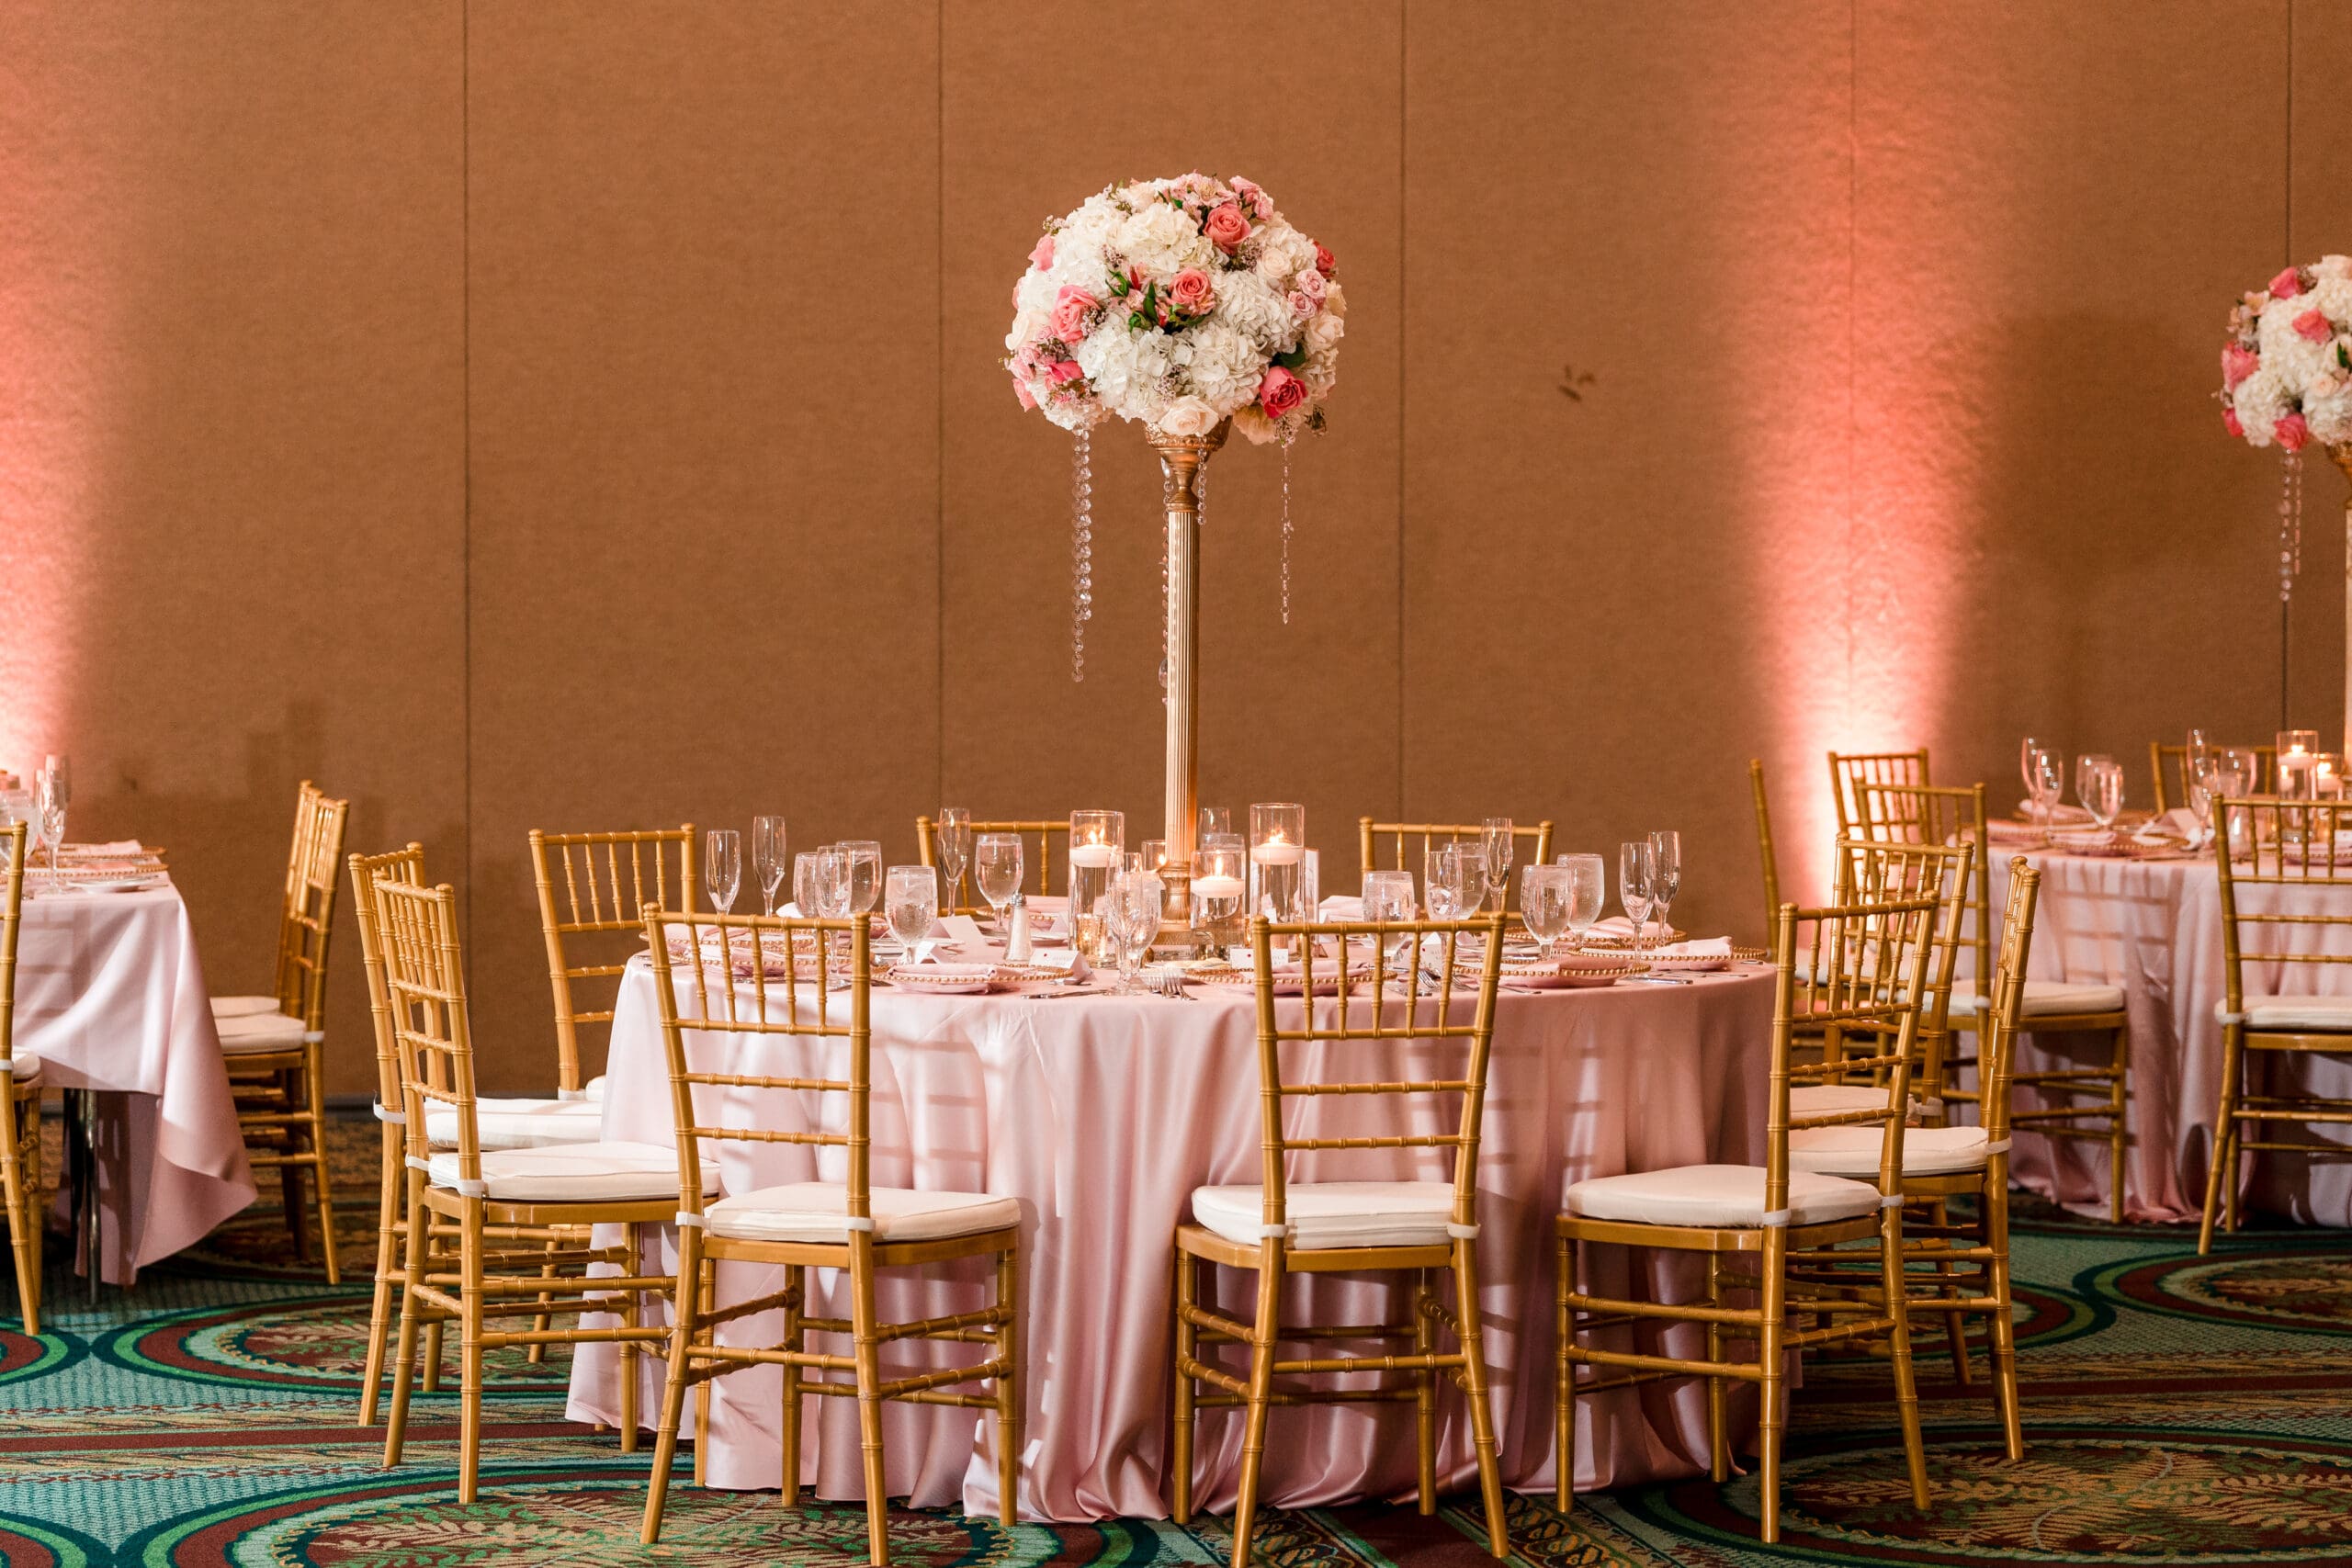 Close-up of a guest table at the Orlando Royale Caribe Reception, featuring a pink tablecloth, white rose flower centerpiece with pink roses, and elegant place settings.